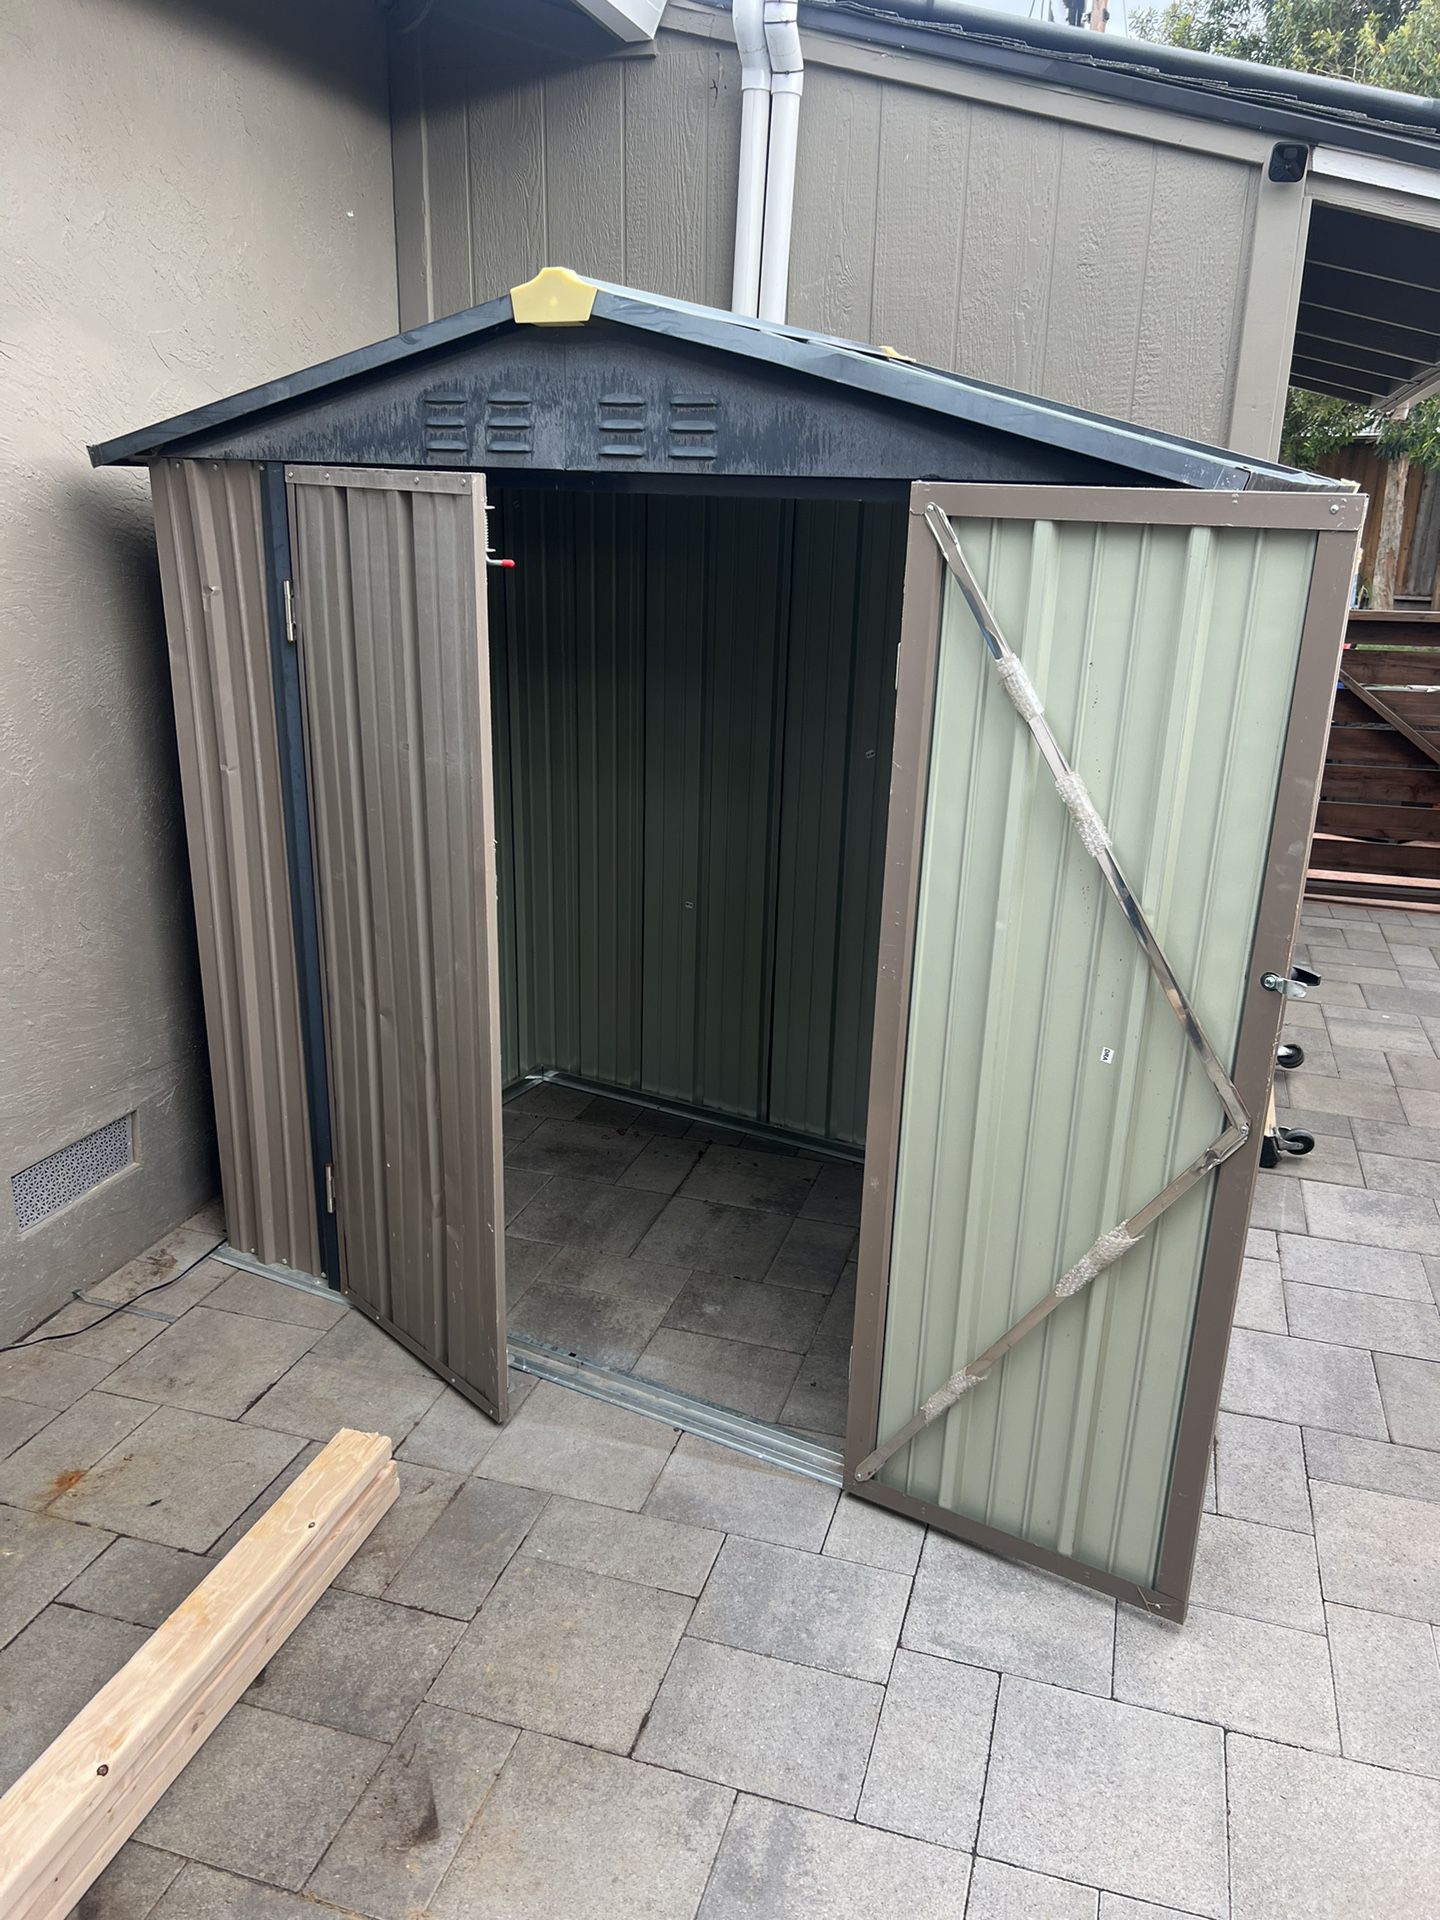  Small Shed